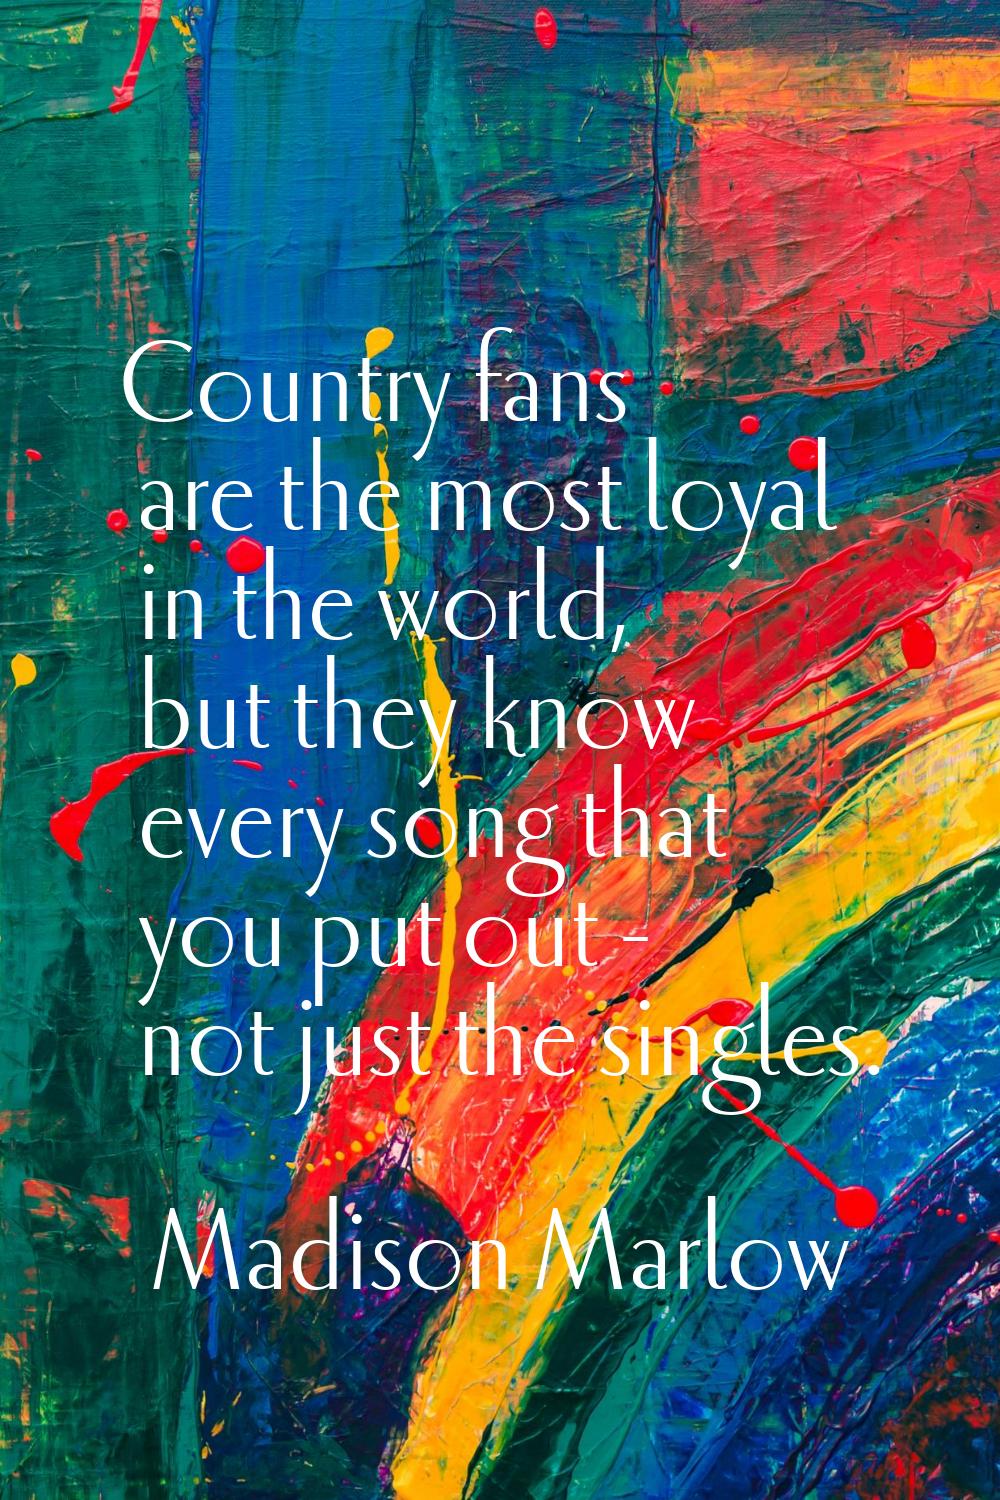 Country fans are the most loyal in the world, but they know every song that you put out - not just 